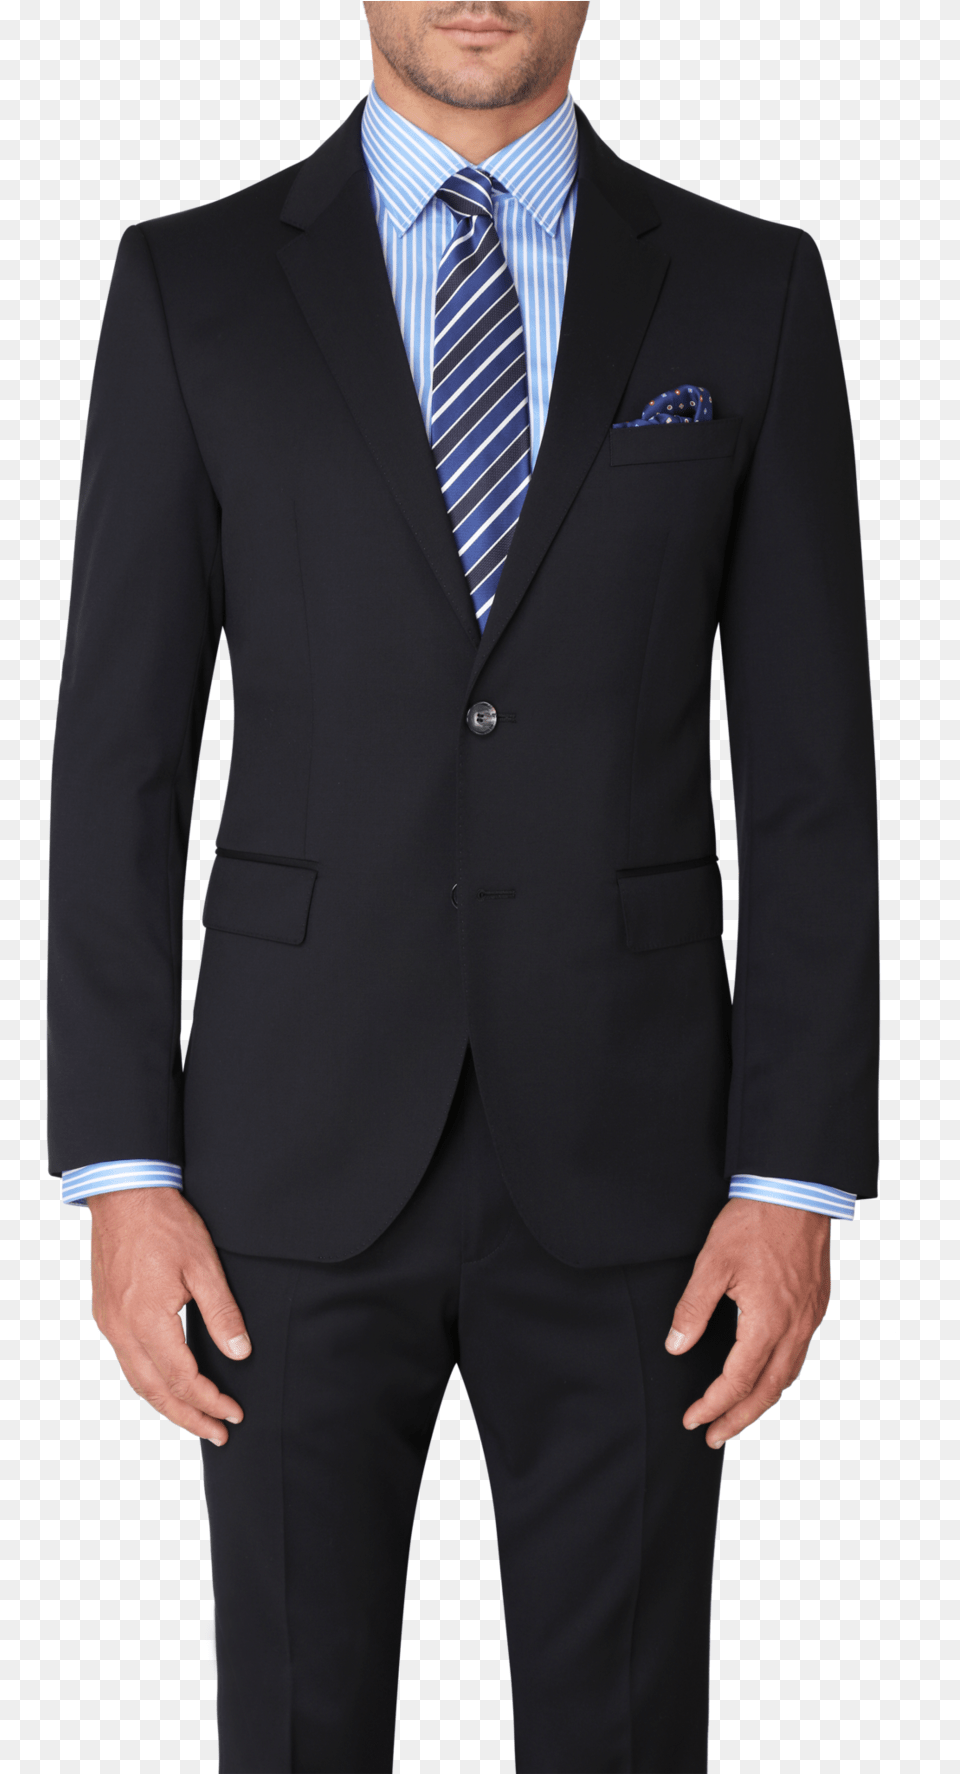 6 Half Body Gieves And Hawkes Navy Suit, Clothing, Formal Wear, Tuxedo, Accessories Free Png Download